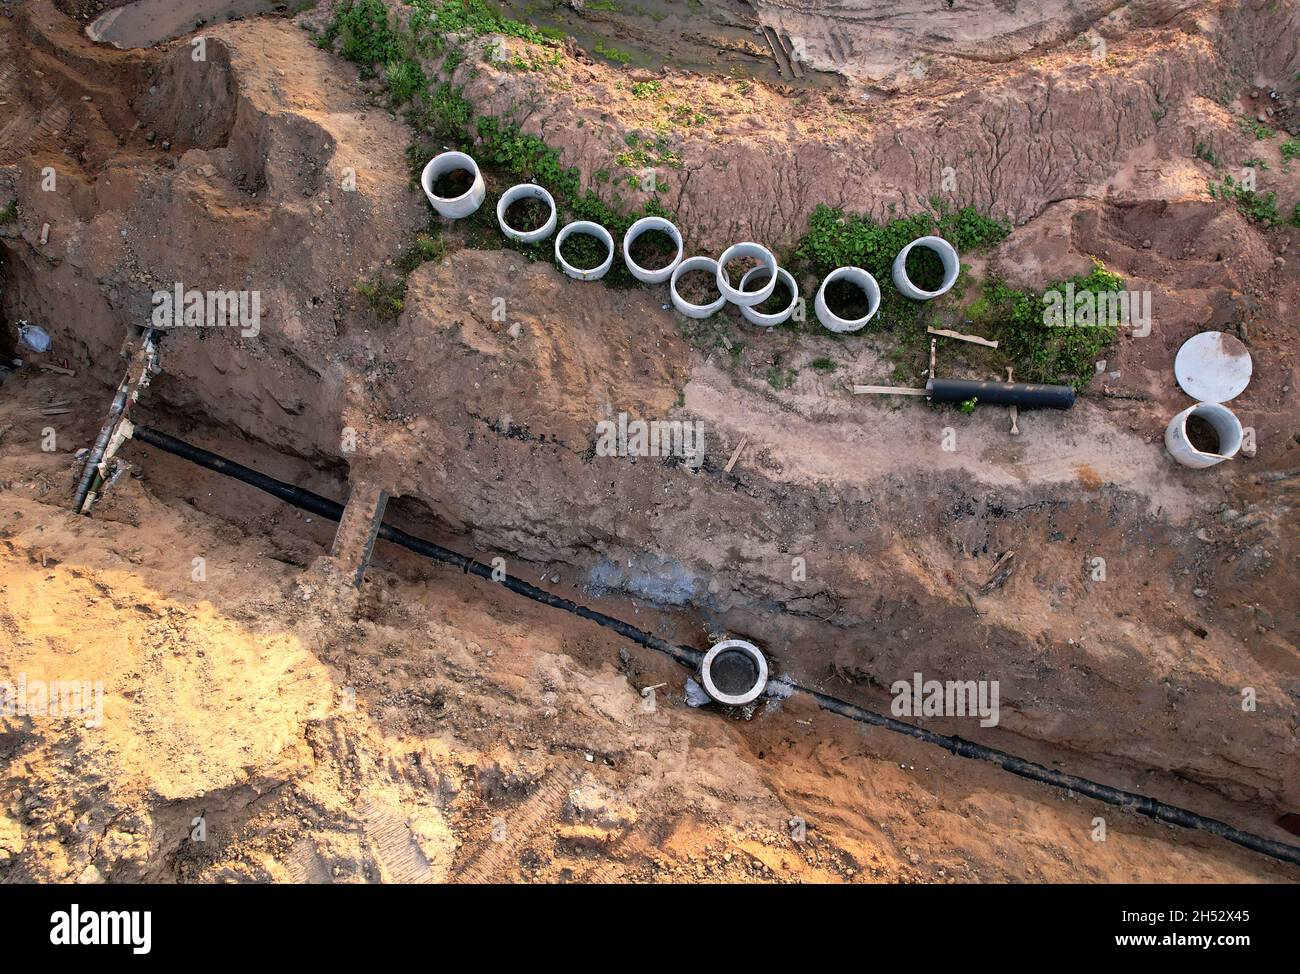 Laying of underground storm sewer pipes and sewerage well. Construction of water main, sanitary sewer, storm drain systems. An aerial view of the conc Stock Photo